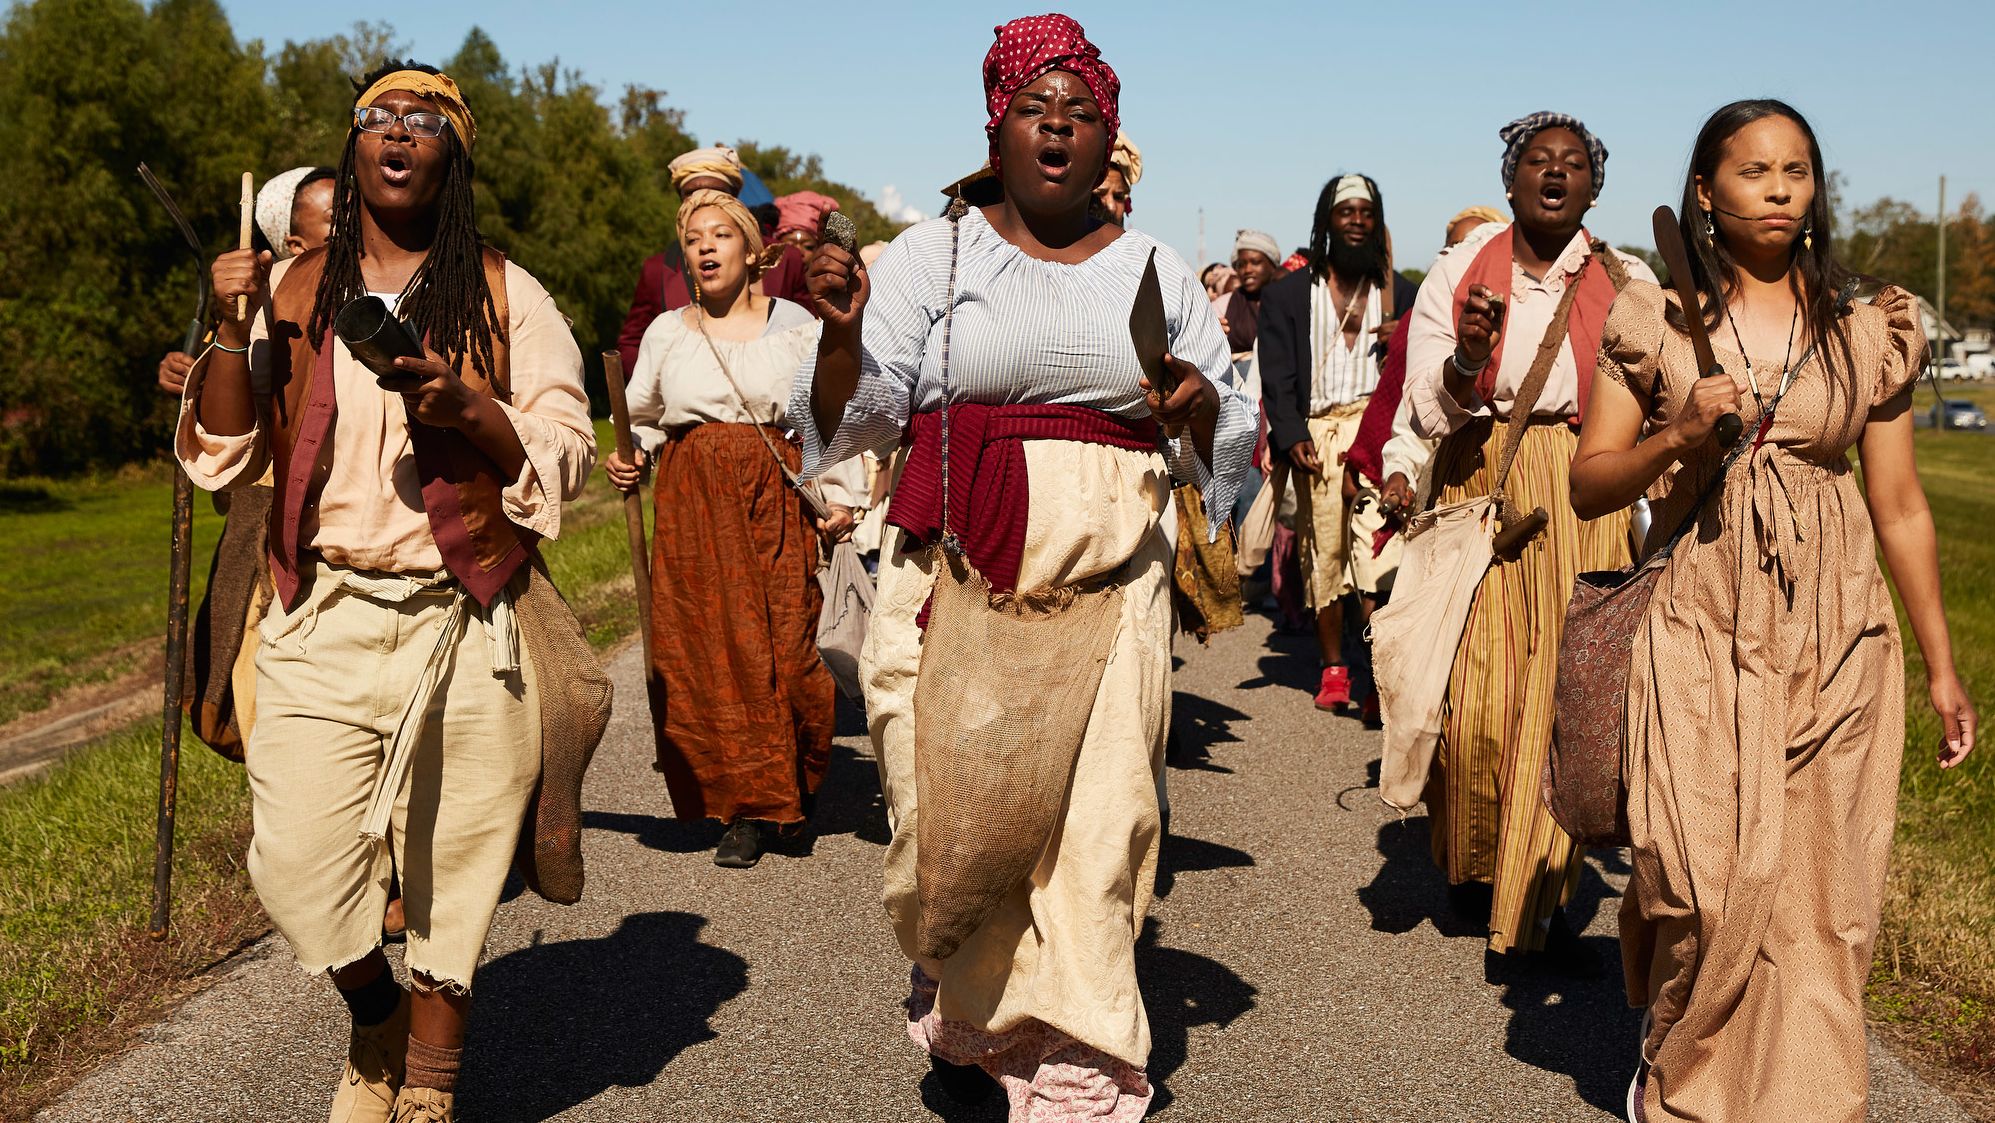 Marching atop the Mississippi River levee in New Sarpy, Louisiana, on Saturday, March 9, reenactors chant, "On to New Orleans, freedom or death -- we're going to end slavery."